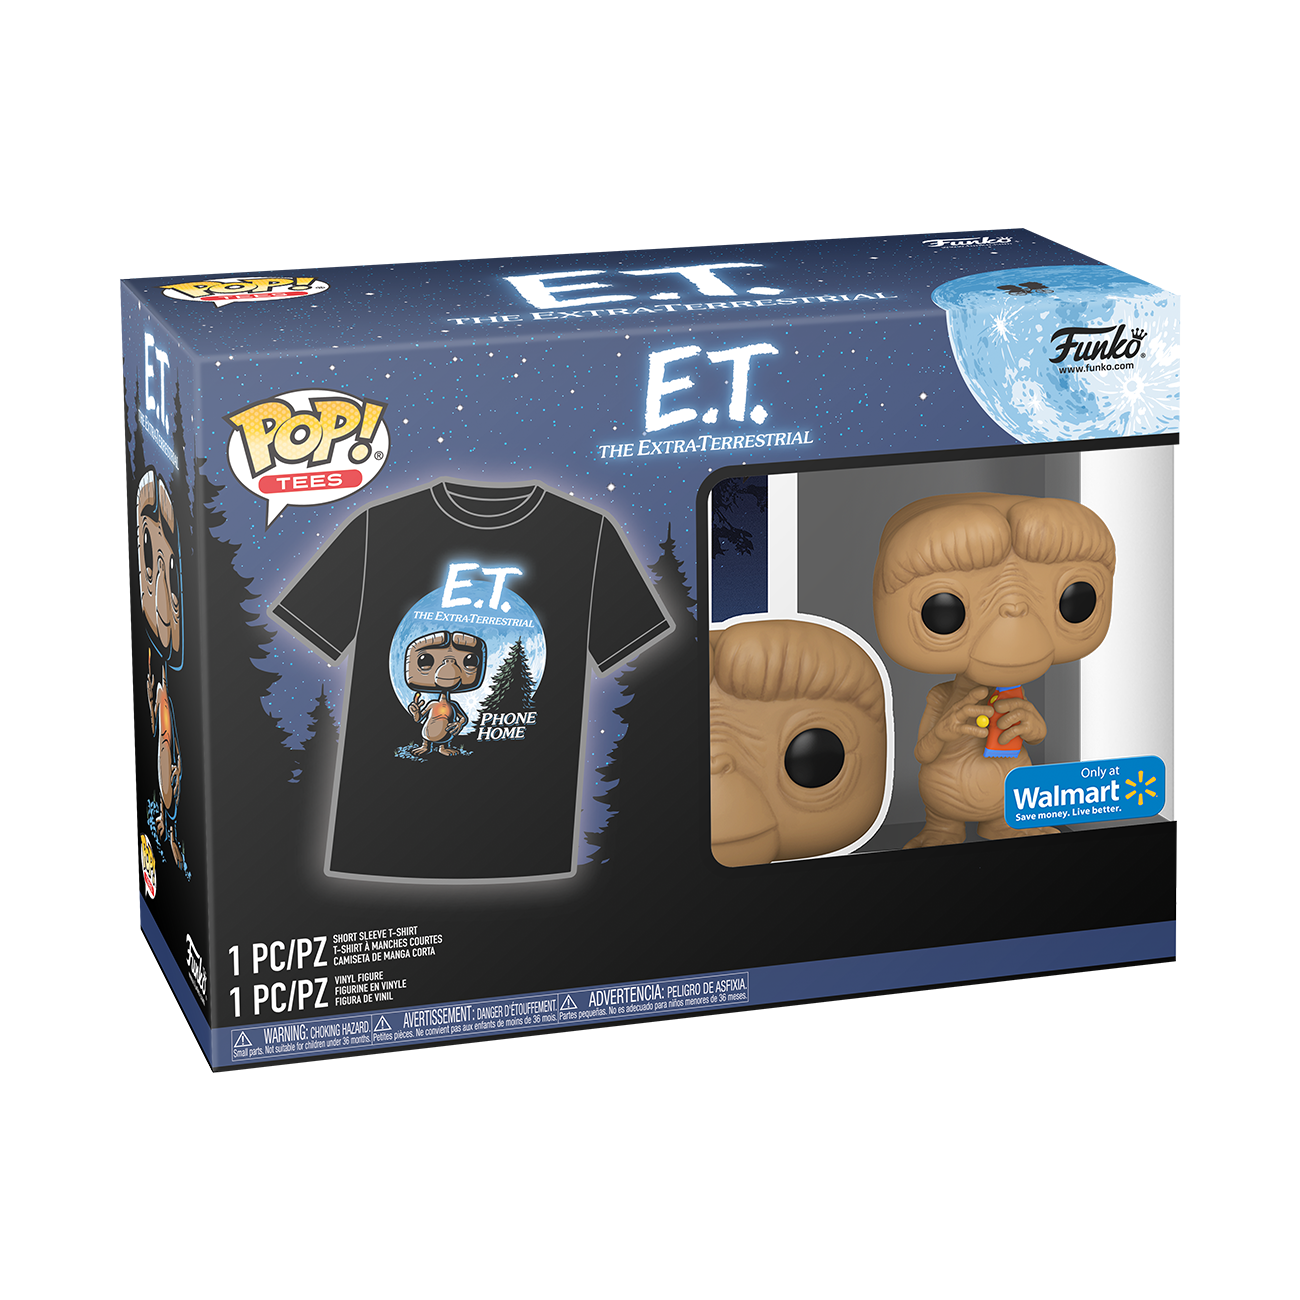 Pop & Tee: Movies: E.T: E.T With Candy (Walmart Exclusive)